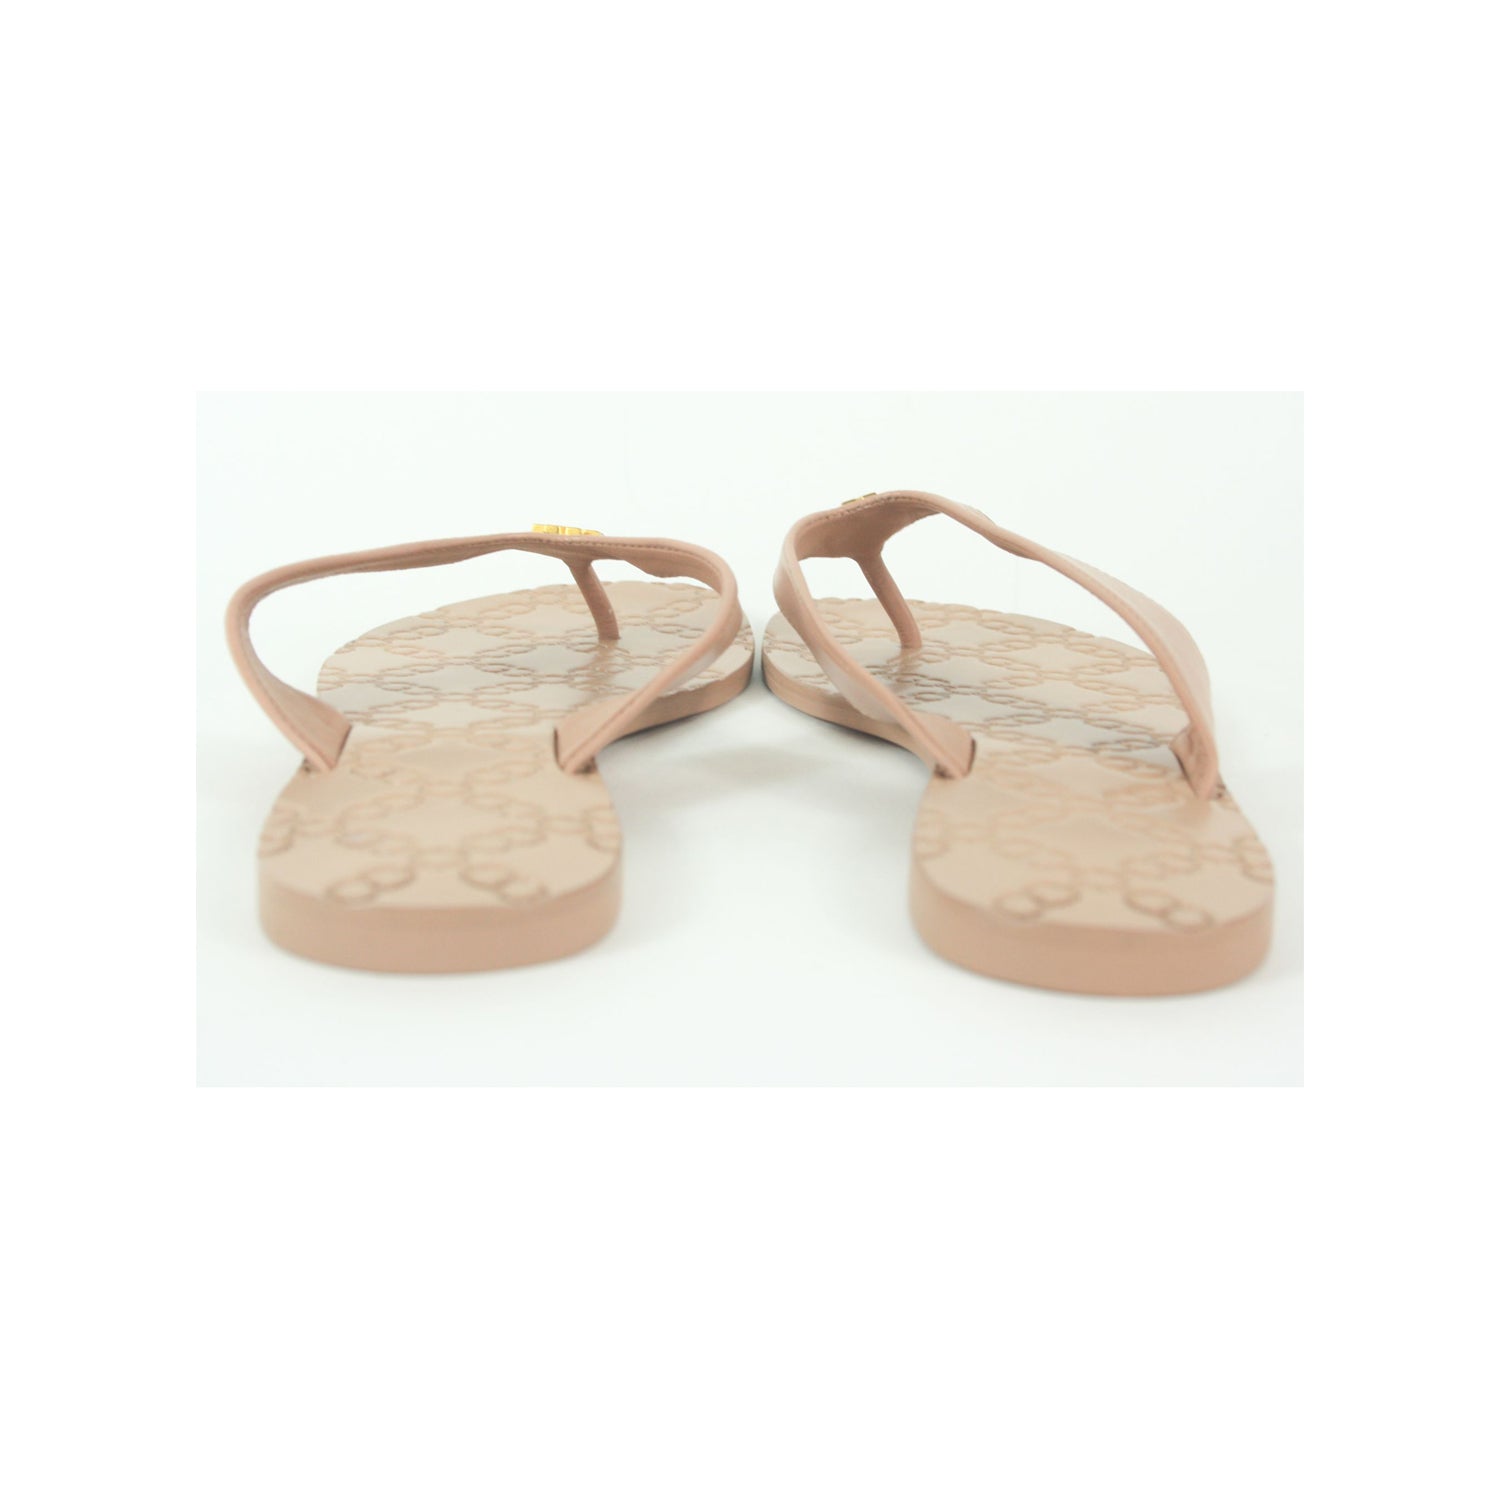 Tory Burch Nude thong sandals